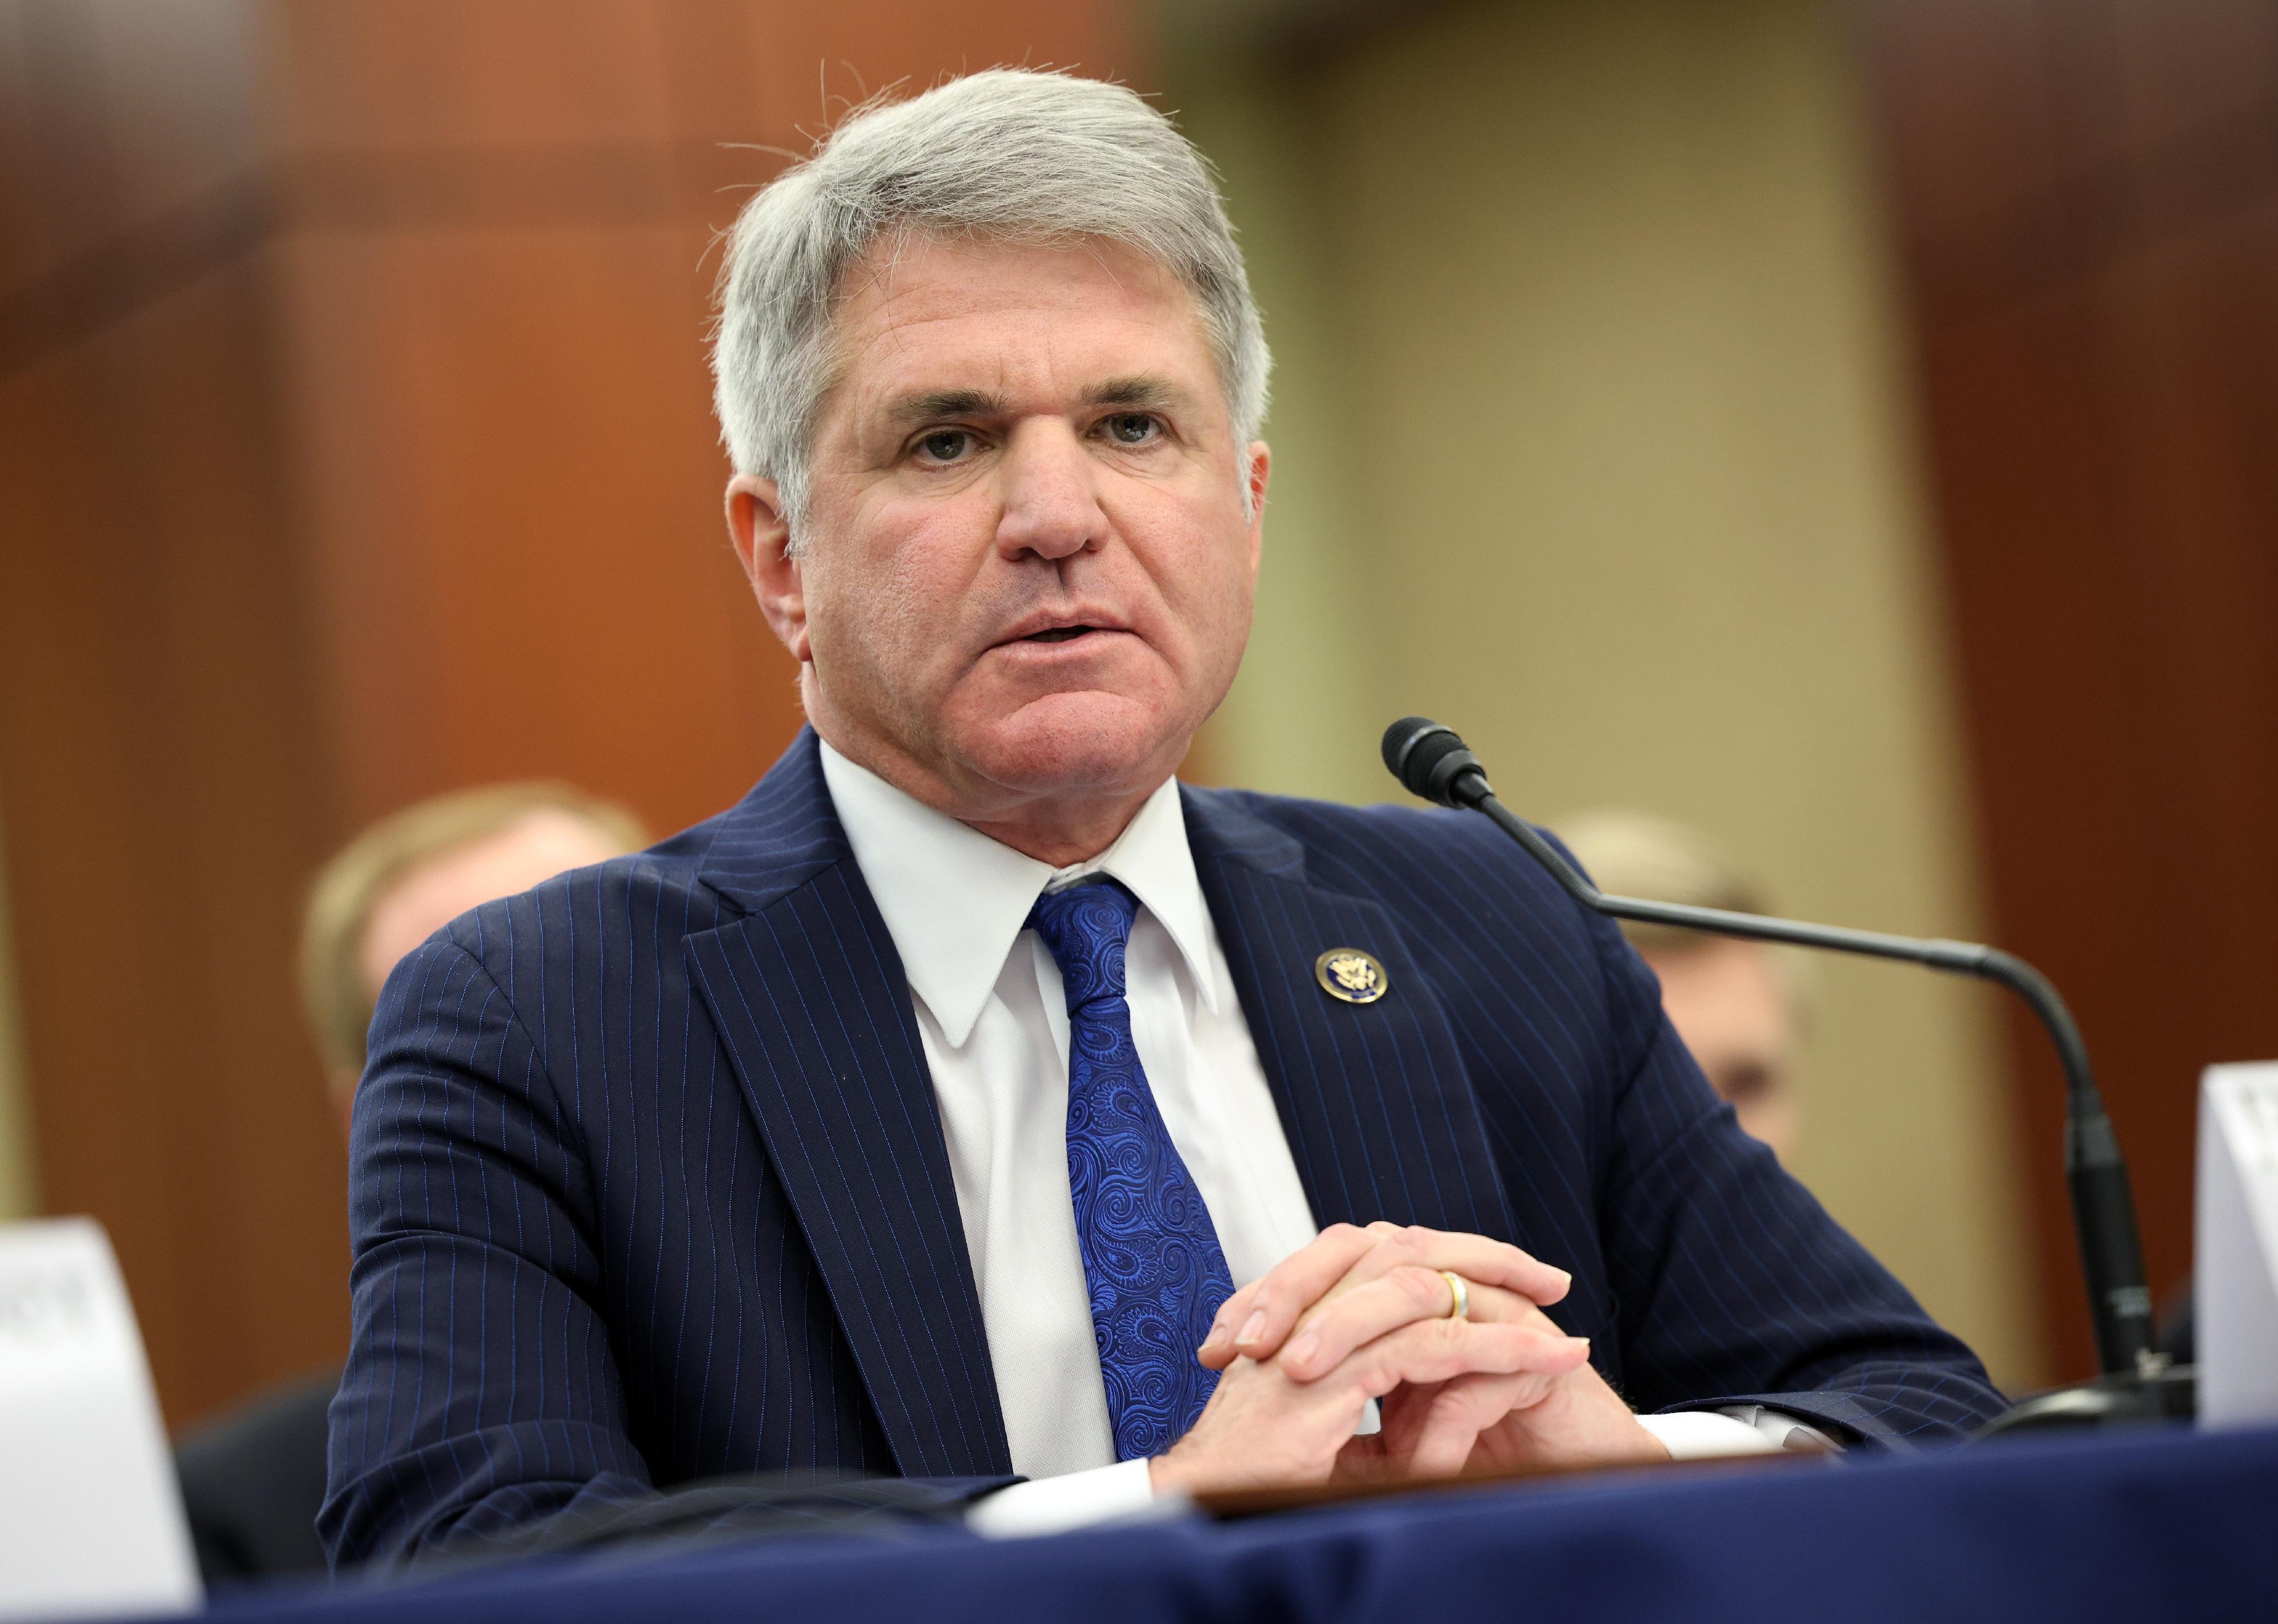 Michael T. McCaul, wearing a dark suit and blue paisley tie, speaking into a microphone.